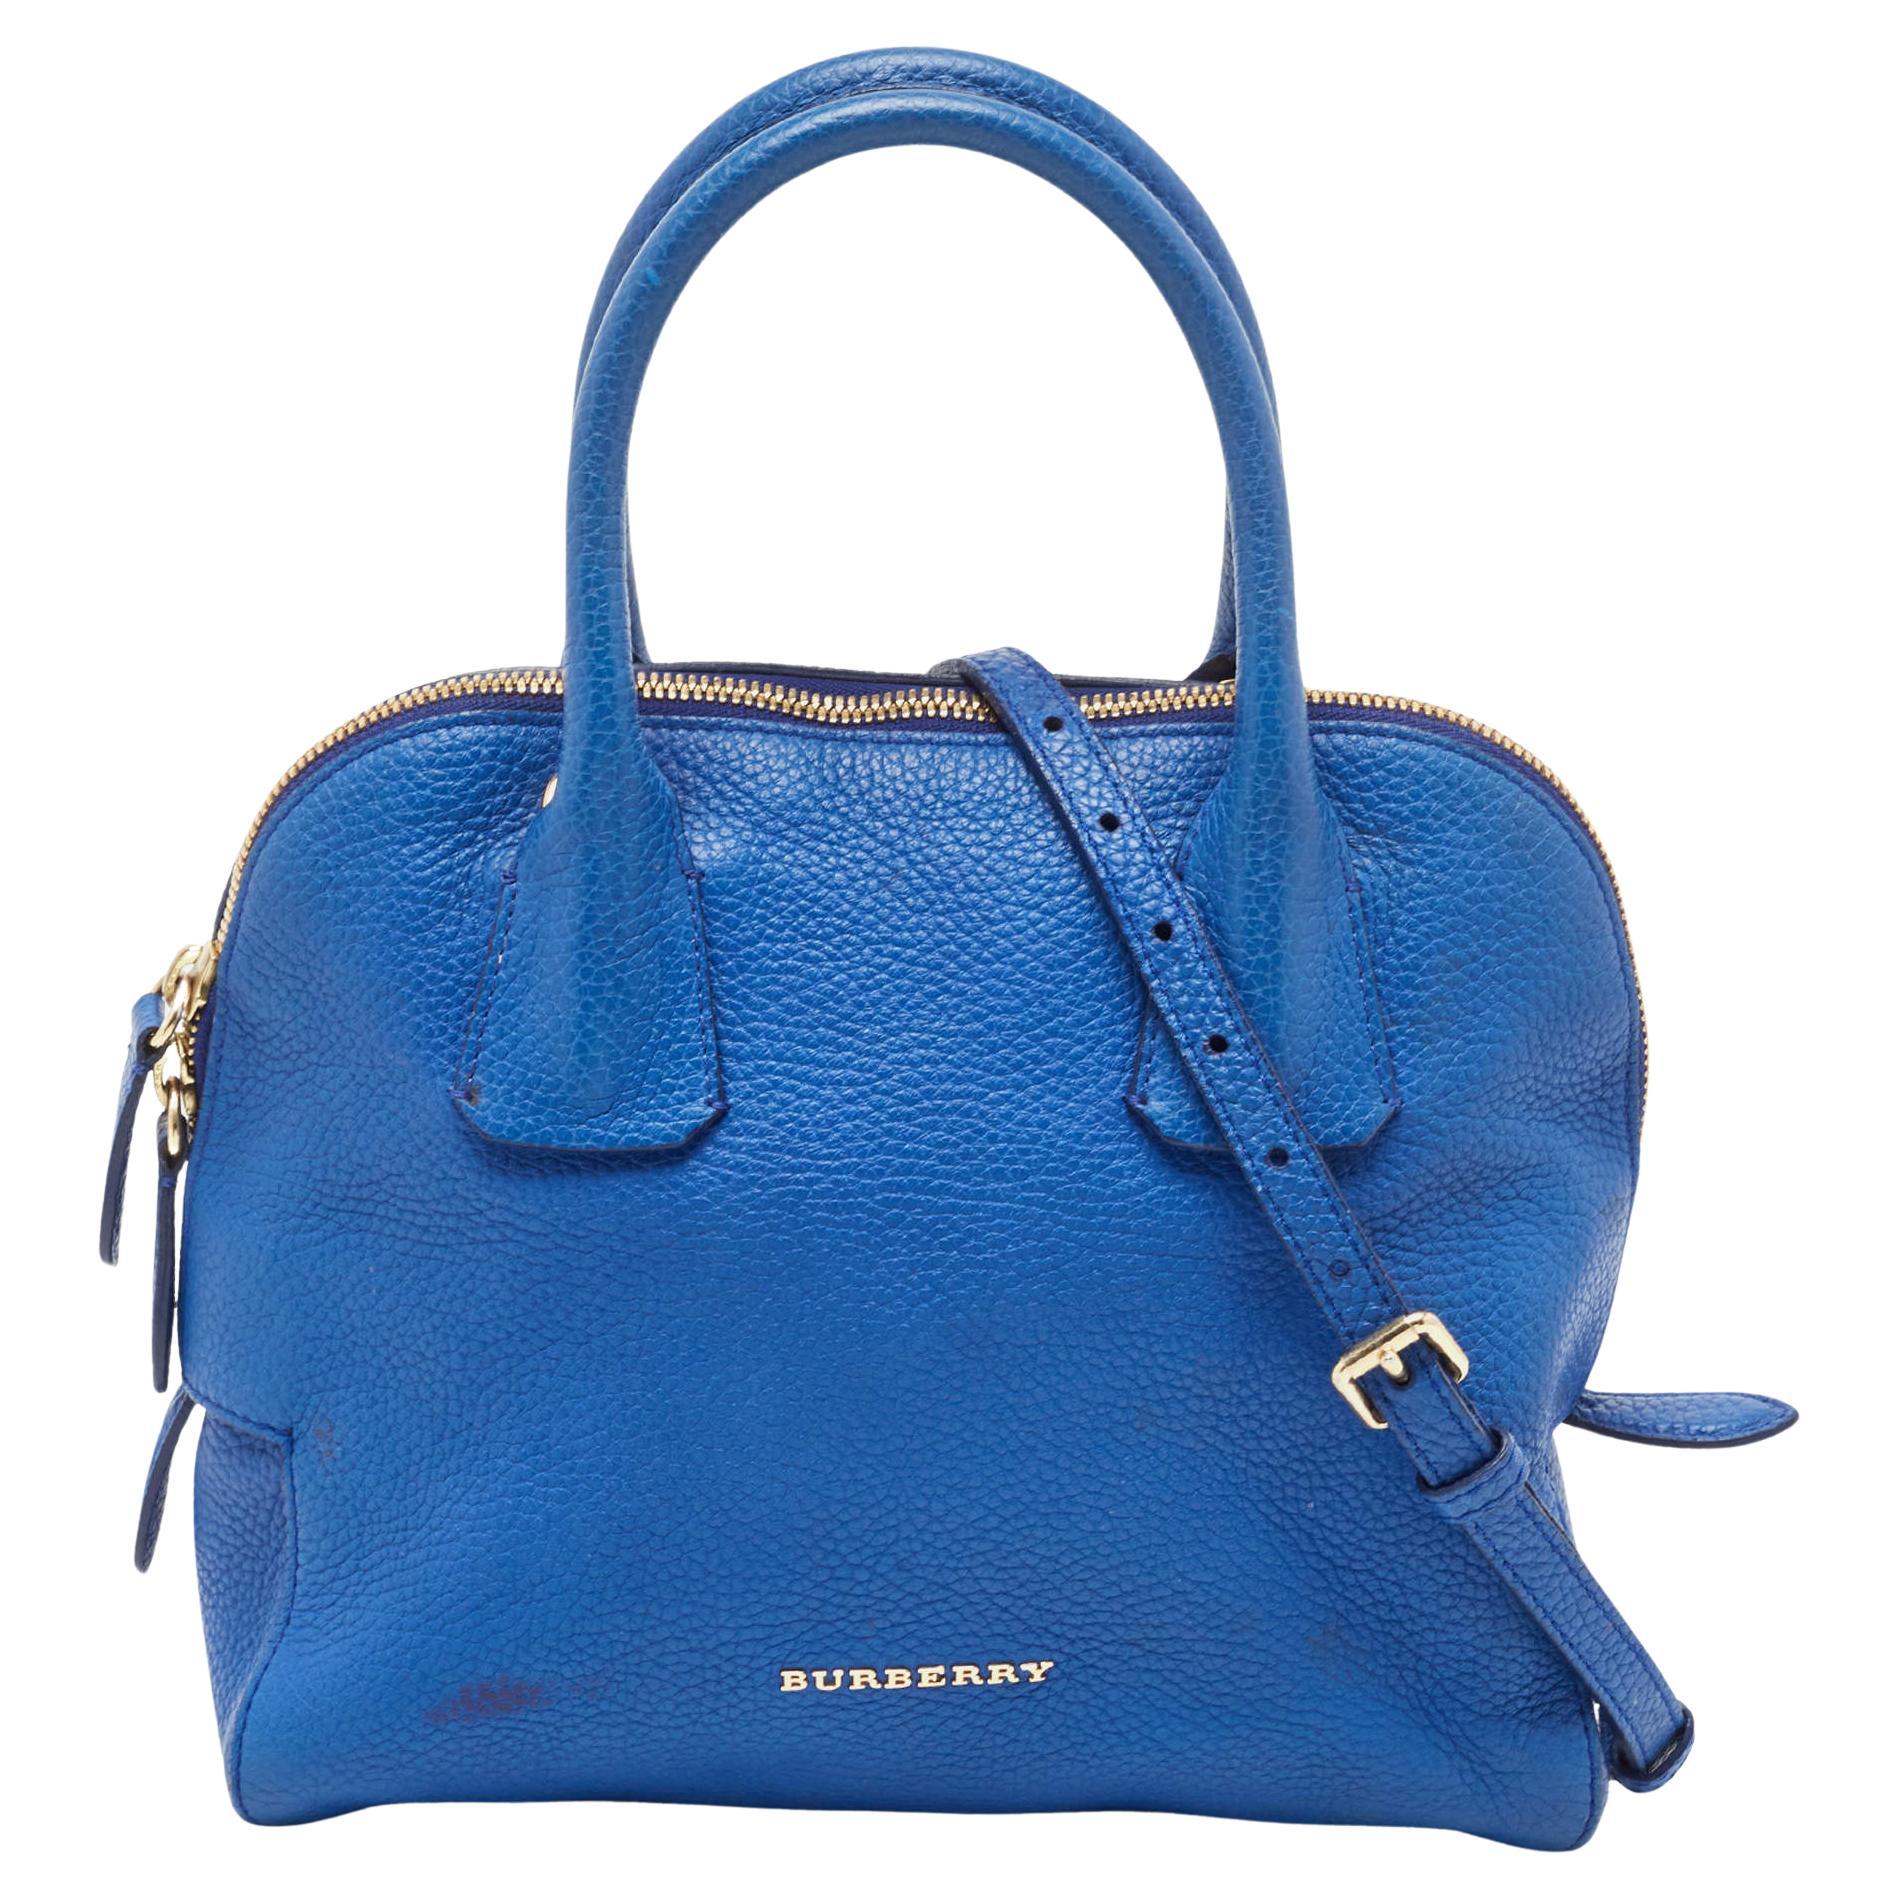 Burberry Blue Pebbled Leather Yorke Satchel For Sale